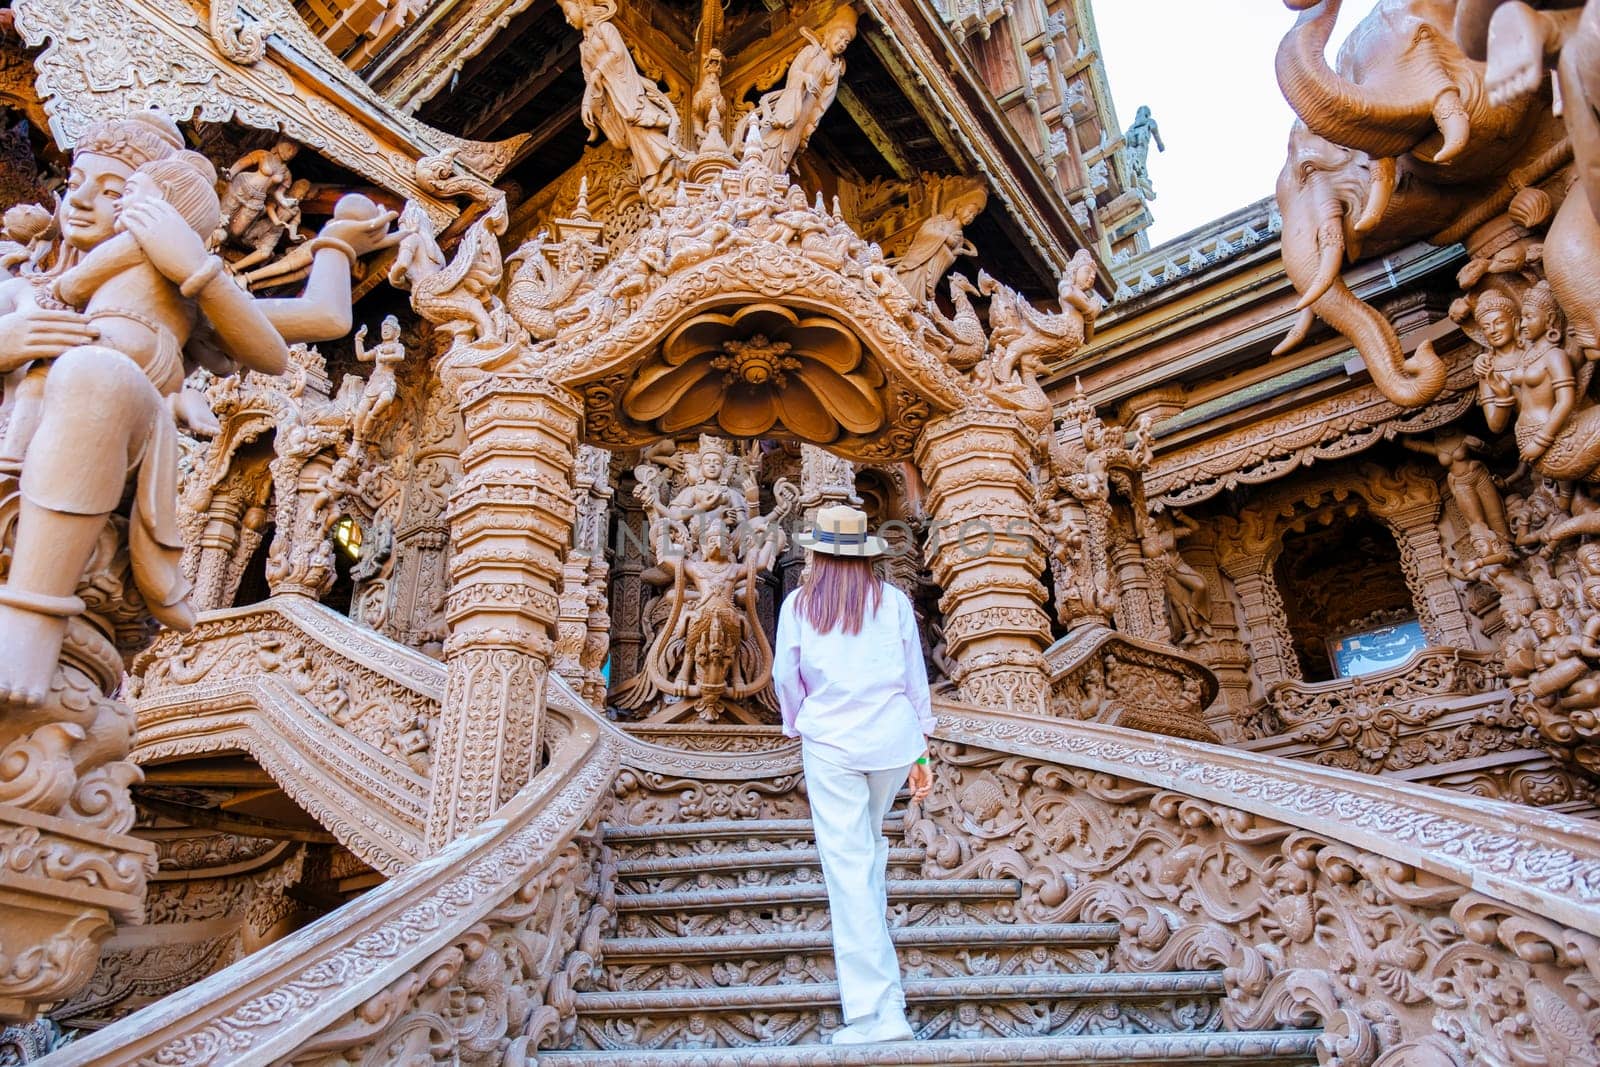 The Sanctuary of Truth wooden temple in Pattaya Thailand, sculpture of Sanctuary of Truth temple by fokkebok